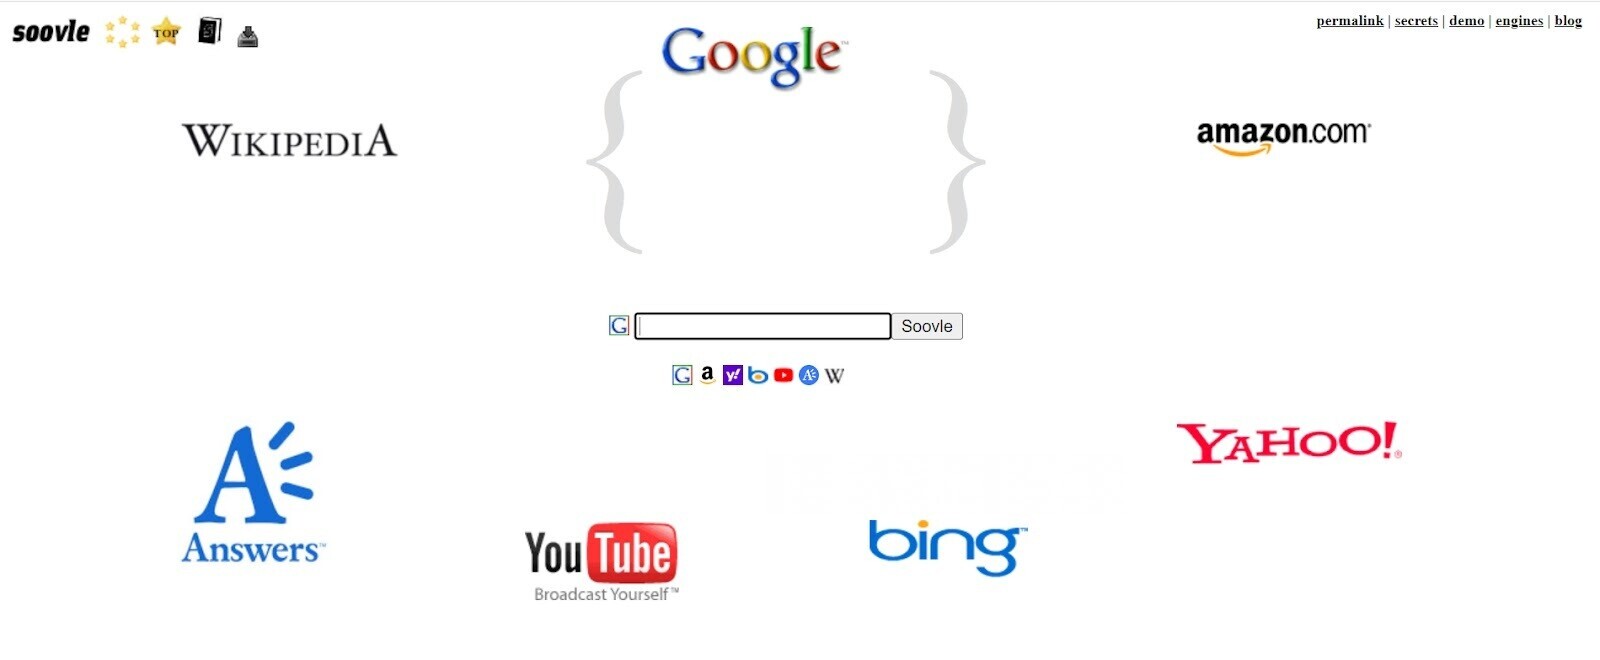 Soovle page with search bar in the center, surrounded with Wikipedia, YouTube, amazon.com etc. logos